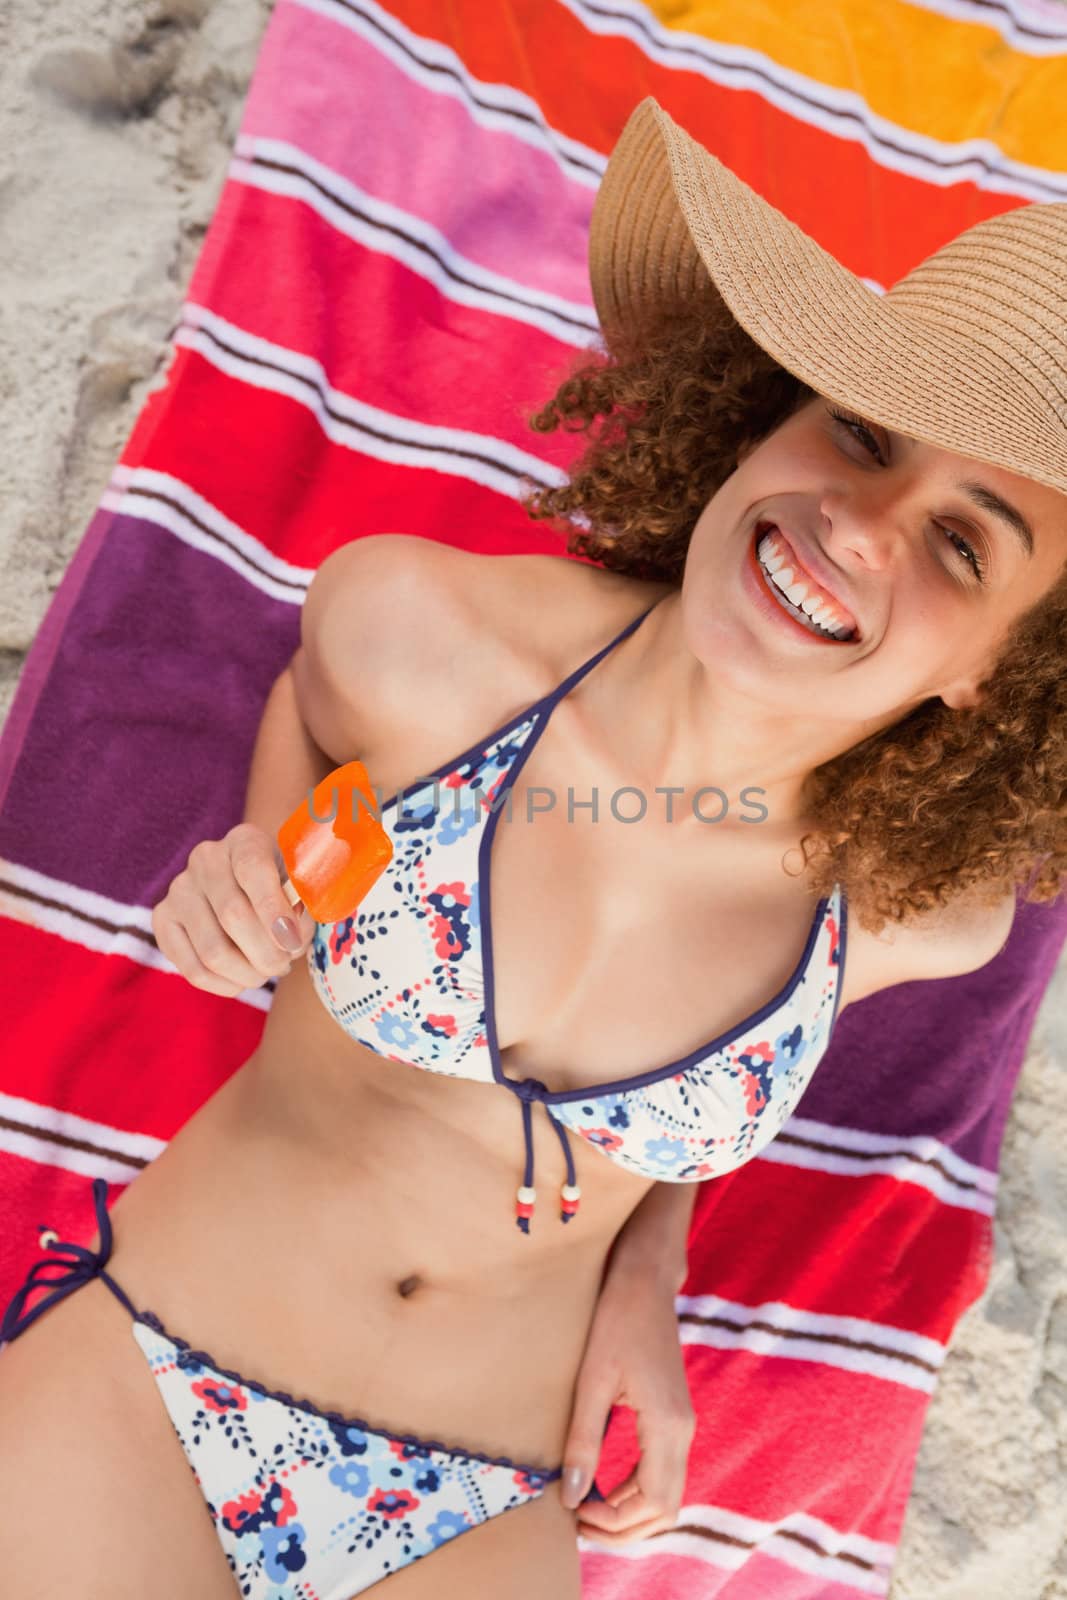 Overhead view of an attractive woman in bikini holding an orange ice lolly by Wavebreakmedia